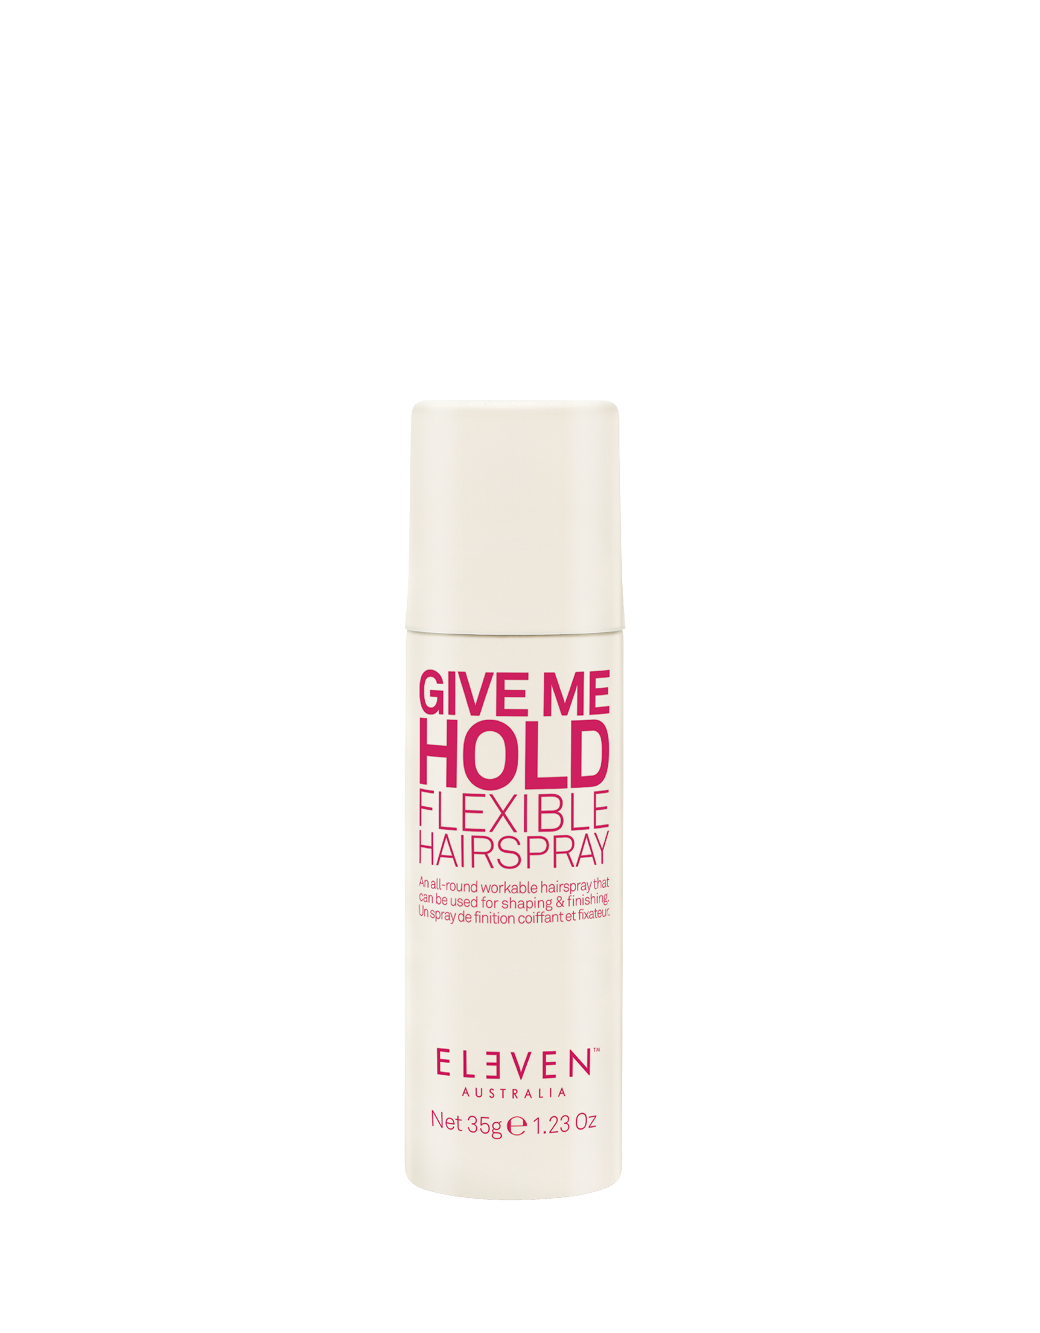 Give Me Hold Flexible Hairspray Travel Size 35g